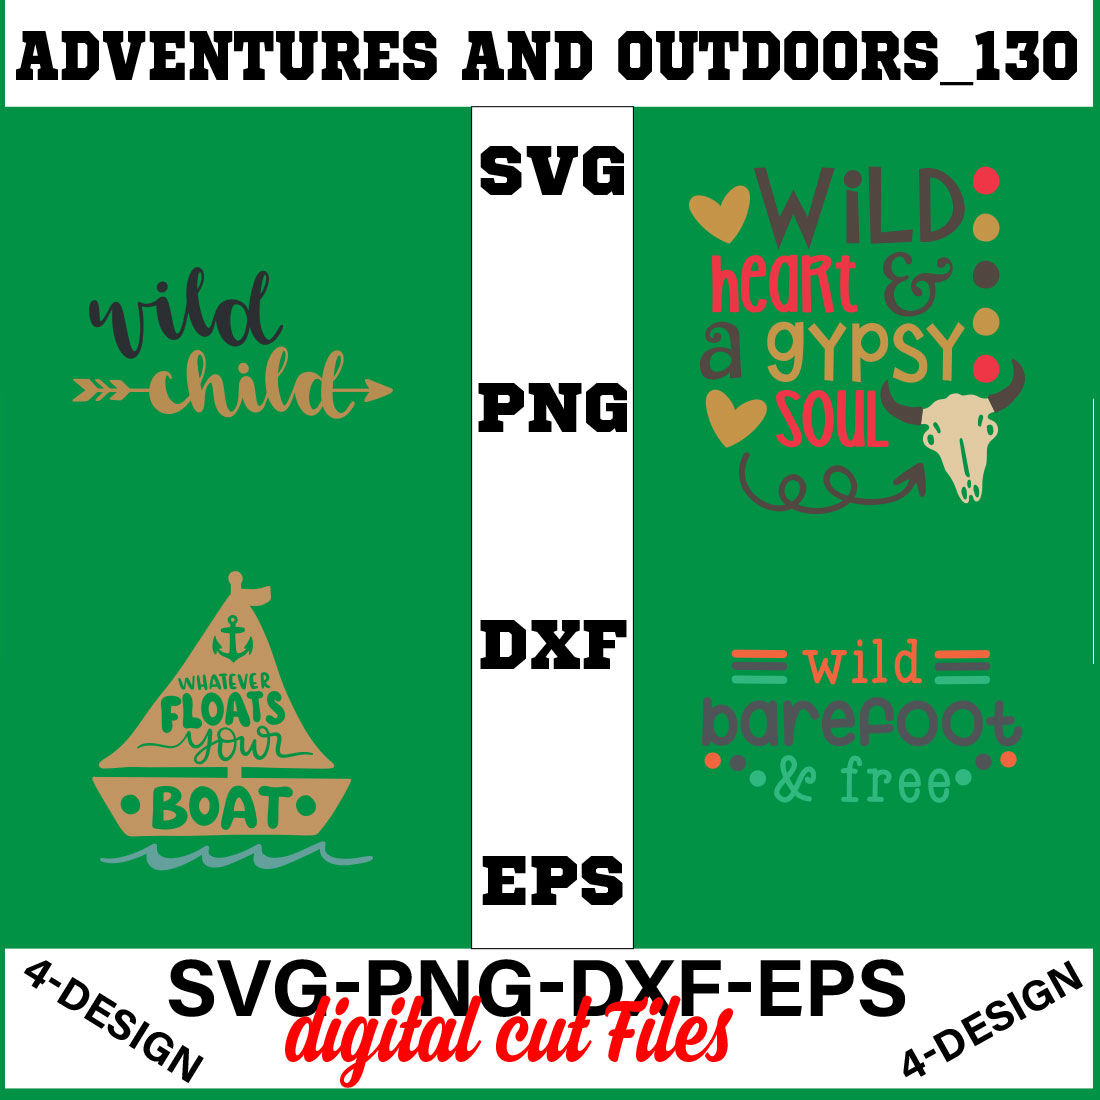 Adventures And Outdoors T-shirt Design Bundle Volume-32 cover image.